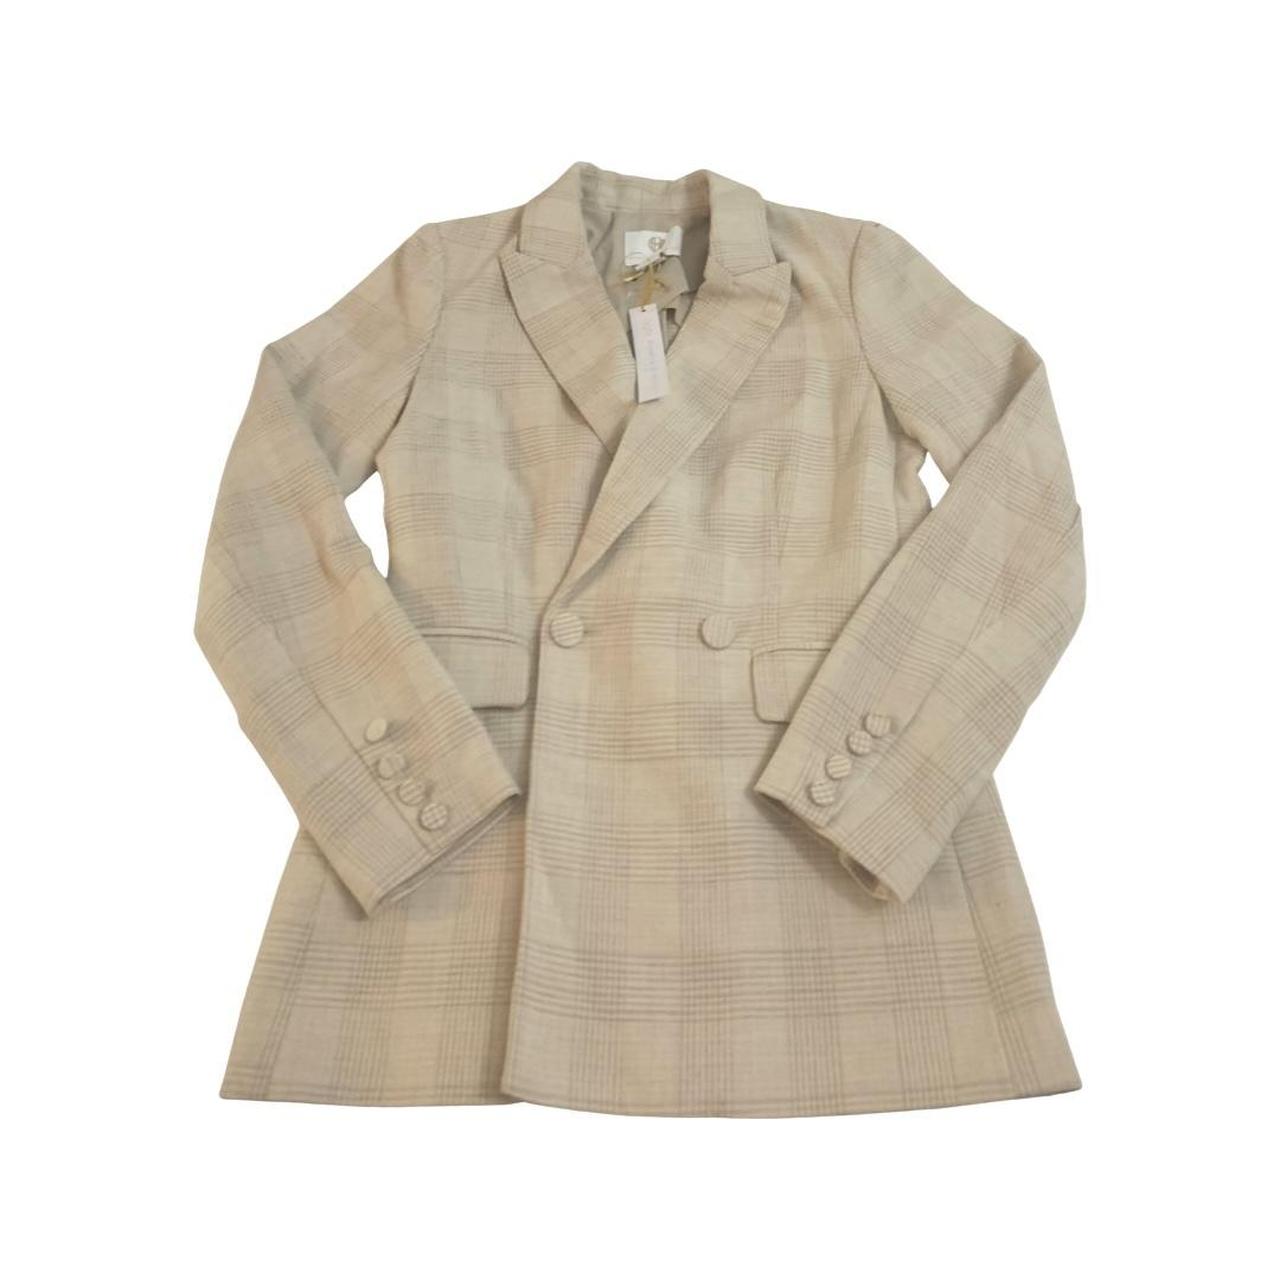 House of Harlow Women's Tan and Grey Jacket